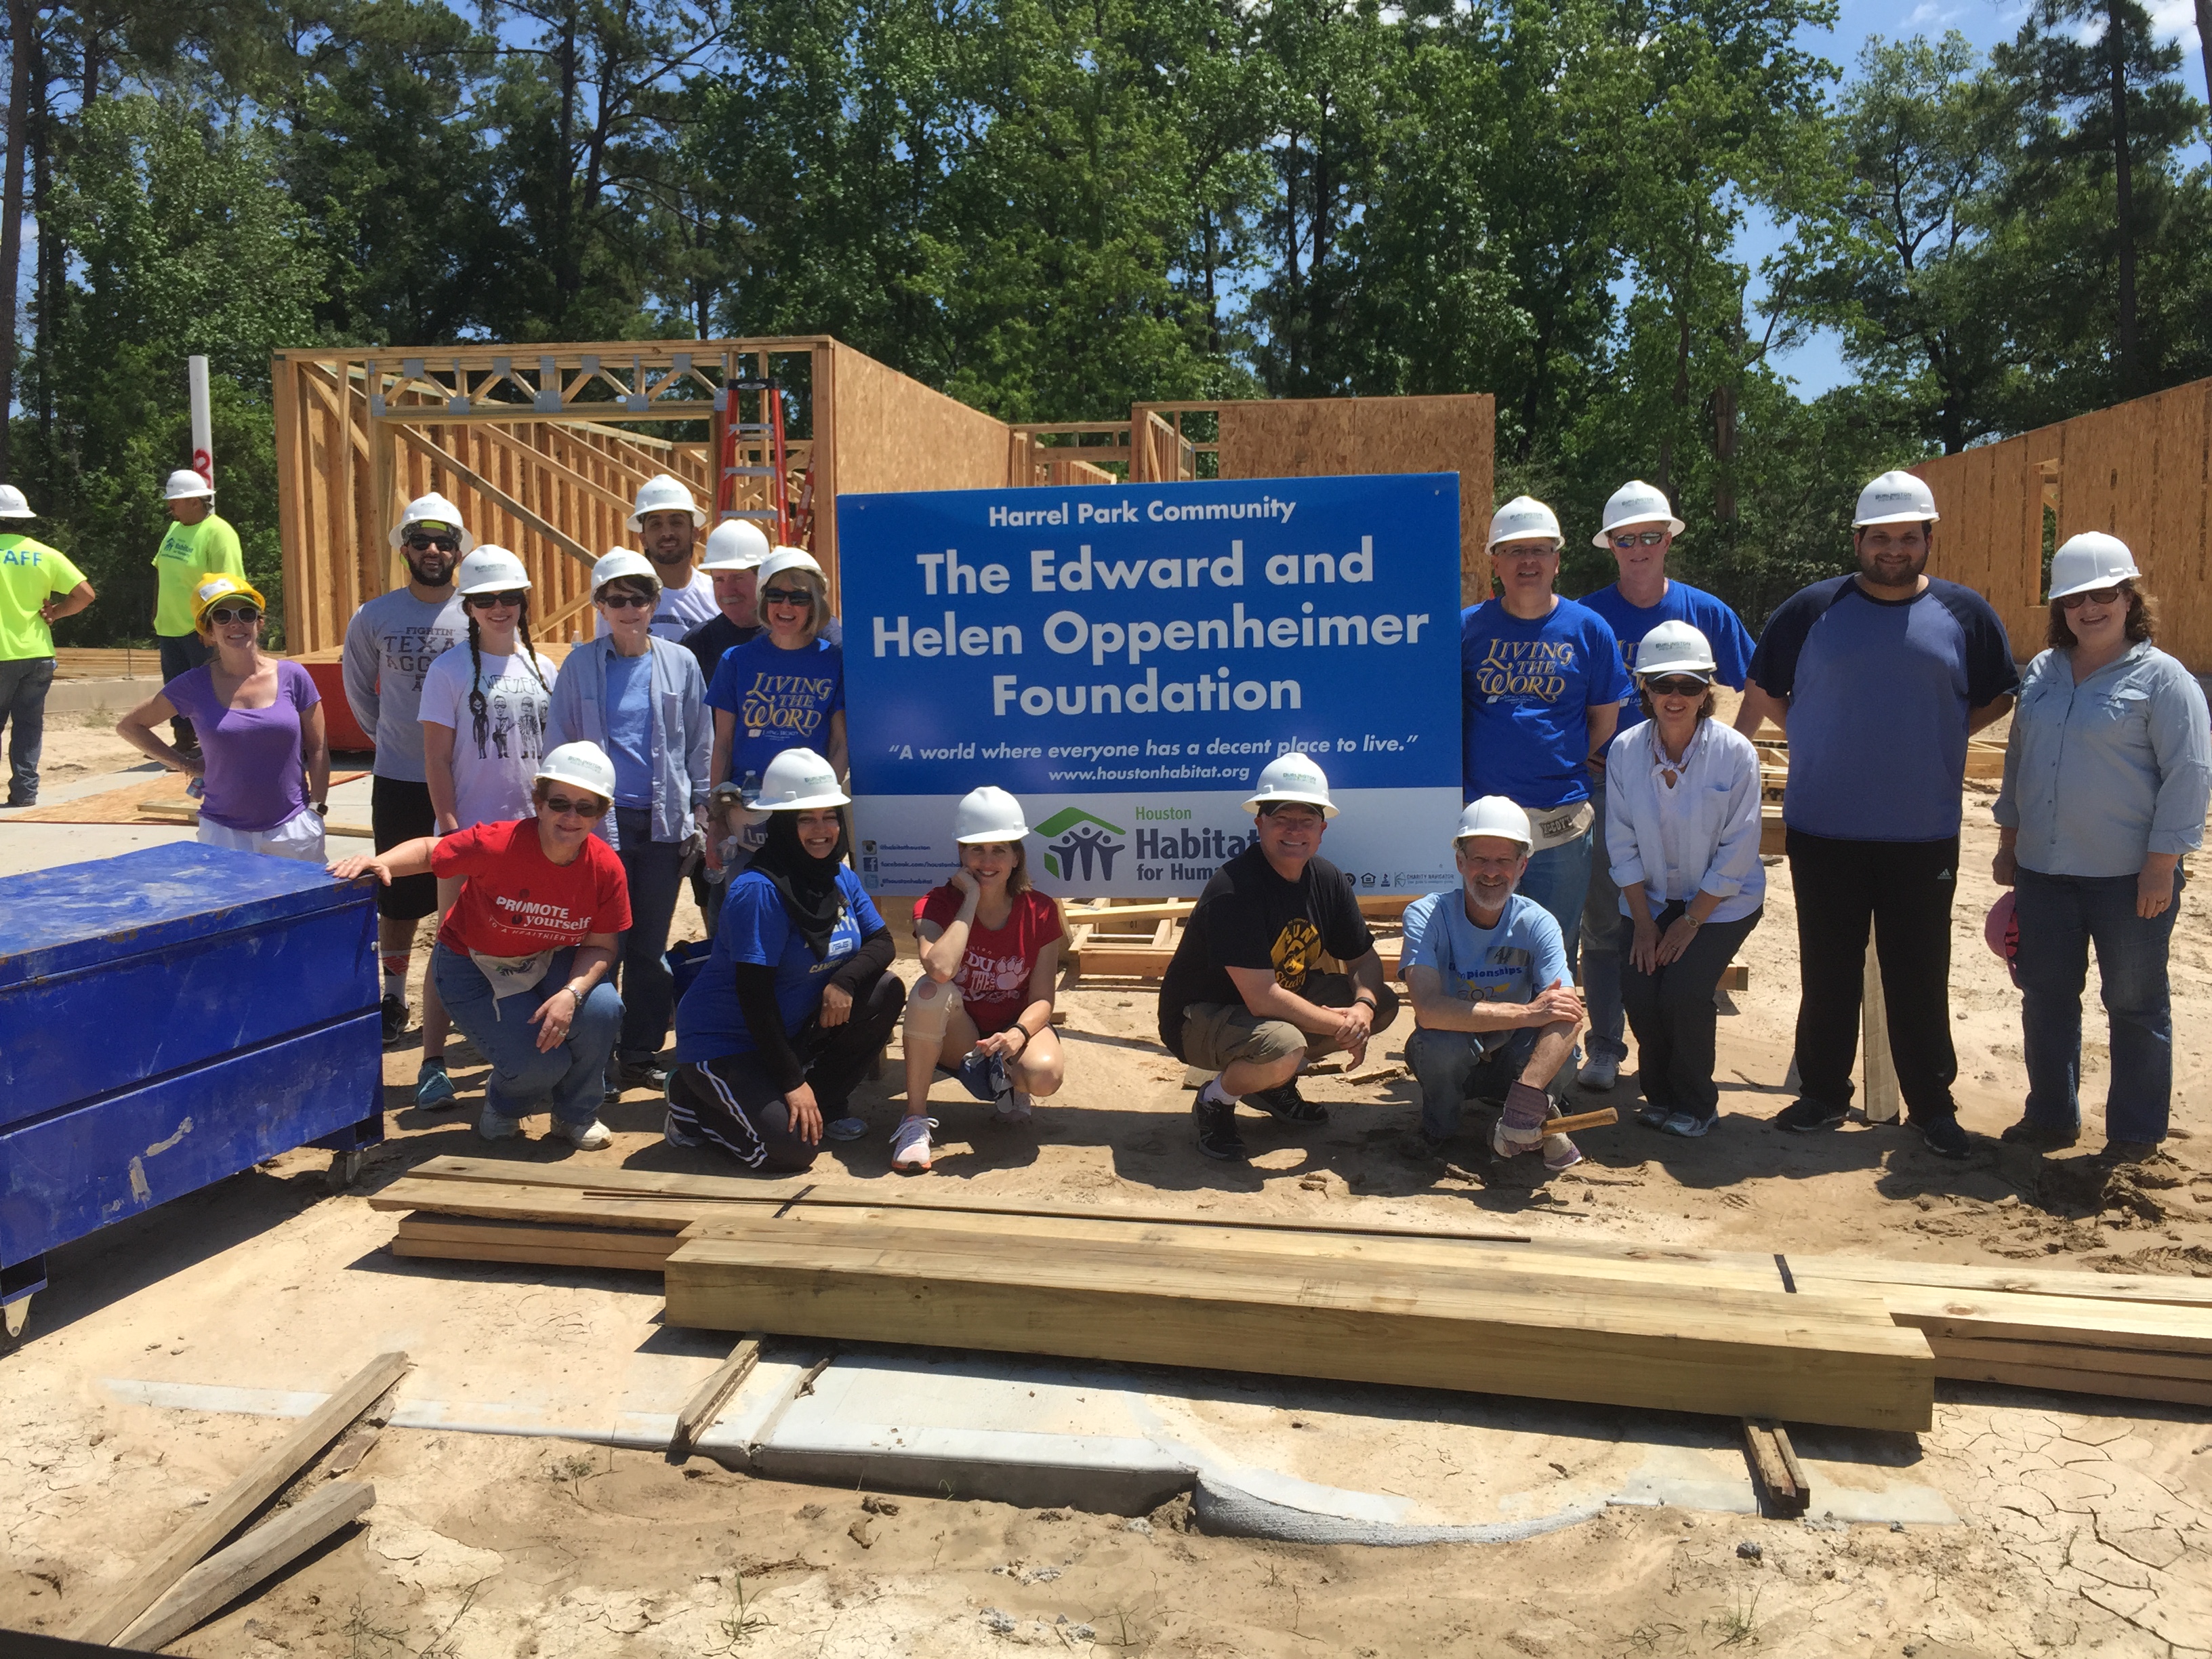 Social Action Project: Houston Habitat for Humanity - Saturday, June 3, 6:30am